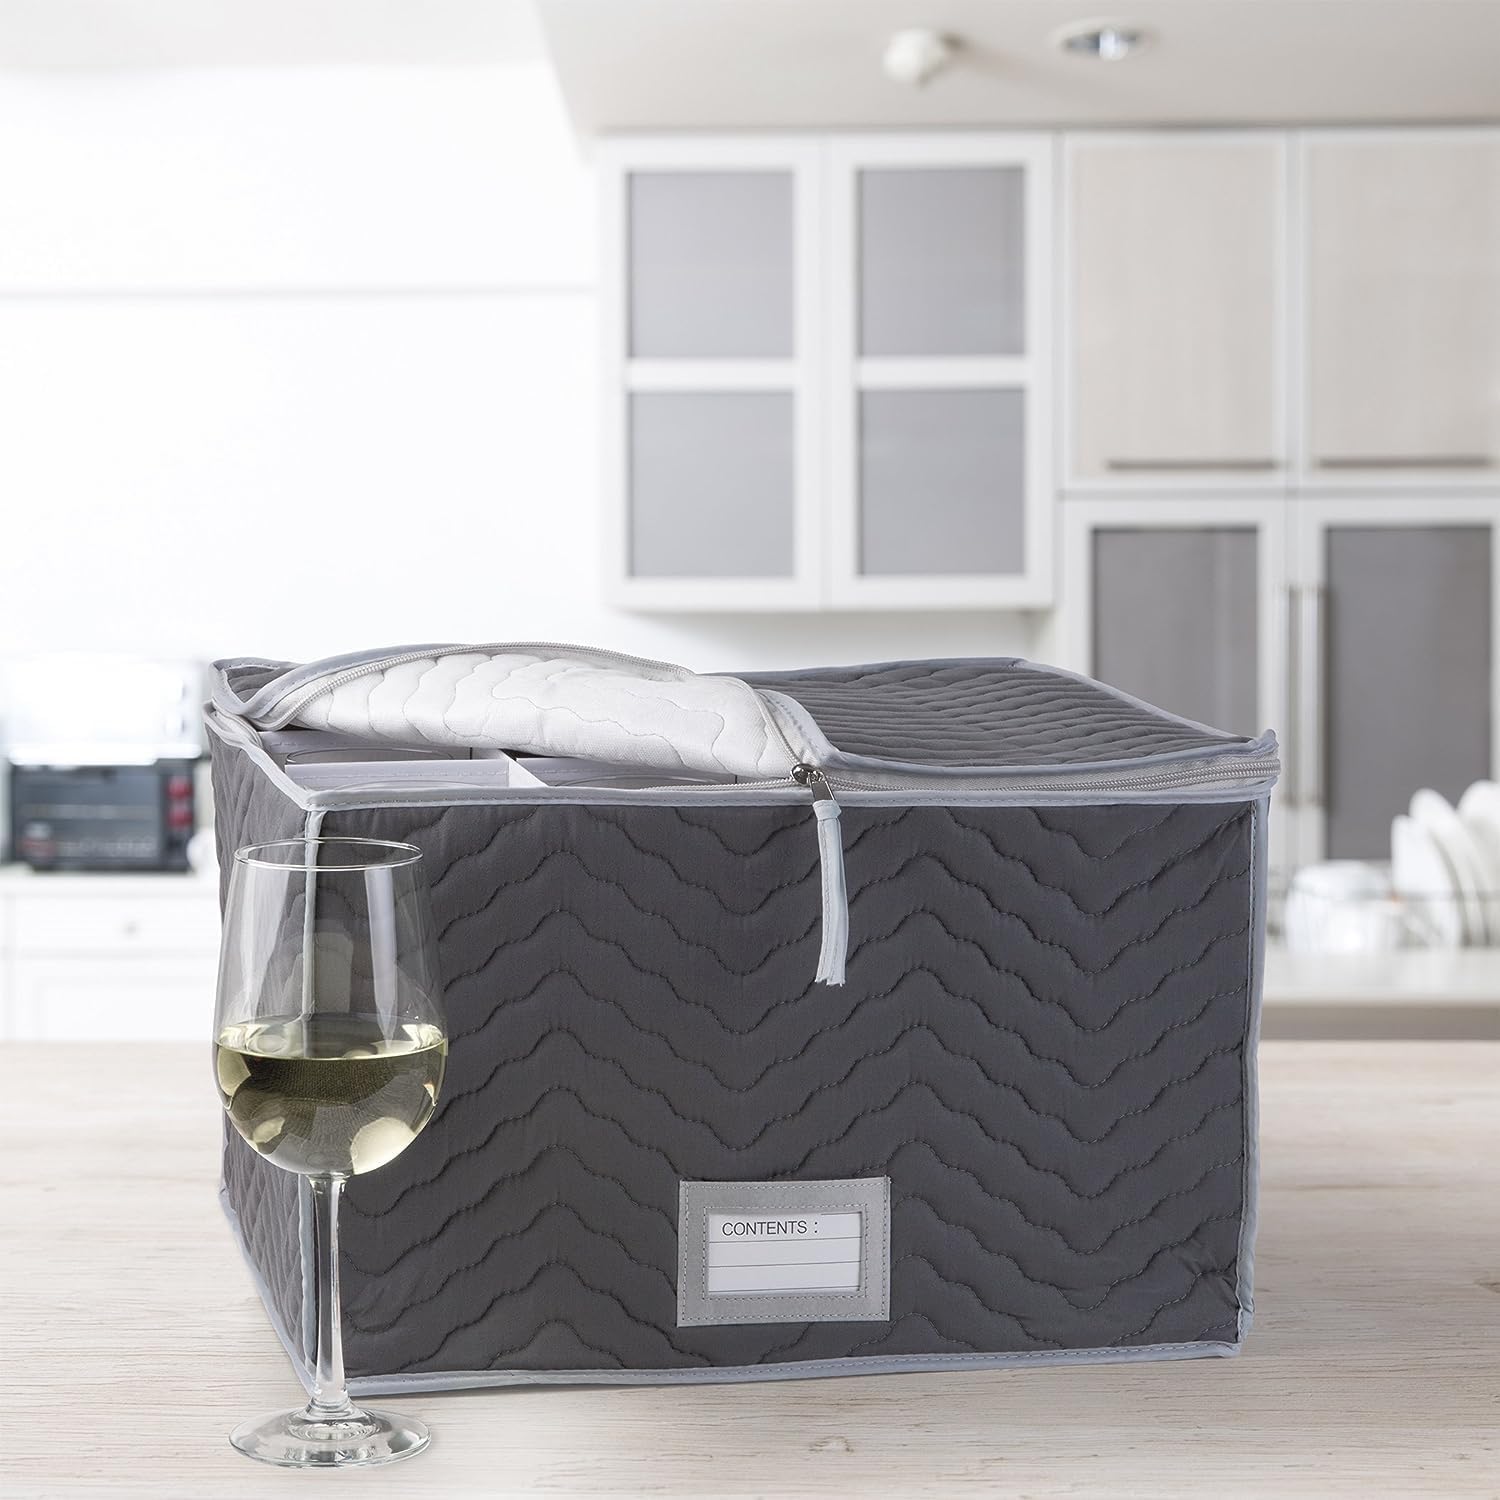 Cup Storage Chest - Deluxe Quilted Microfiber